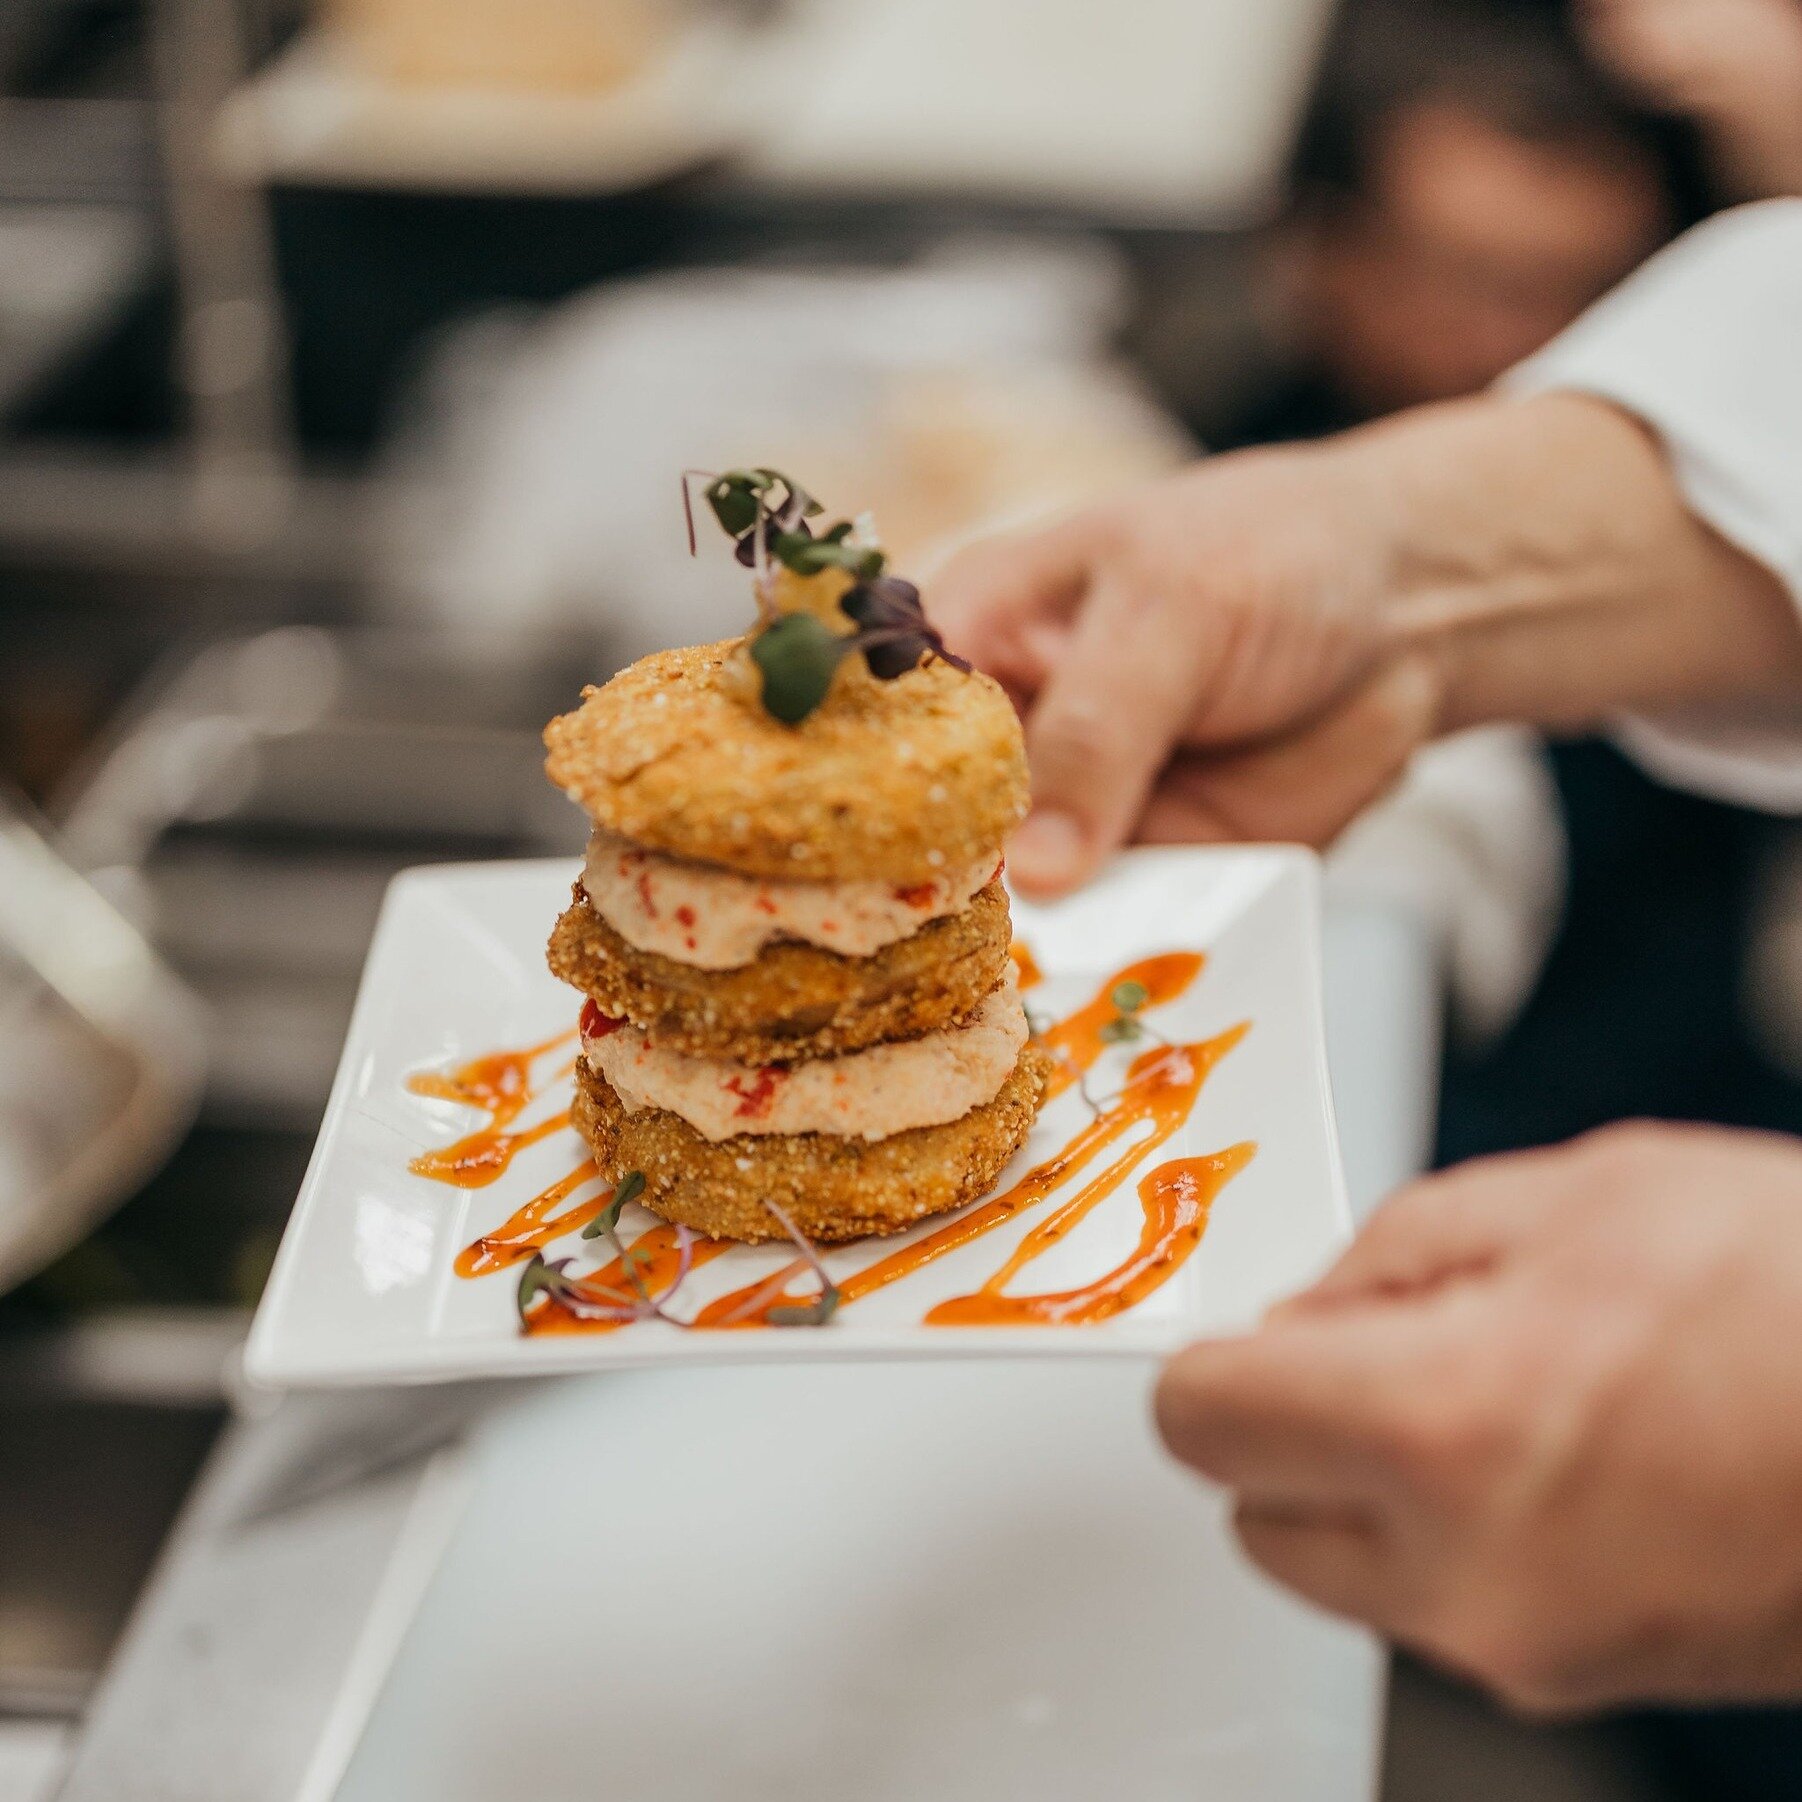 So we wanna know, what's your favorite thing on our menu? Anything you'd like to see return?

#southerninnrestaurant | #southerninnlexingtonva #southerncomfort #southerndining | #finedining | #lovelexva